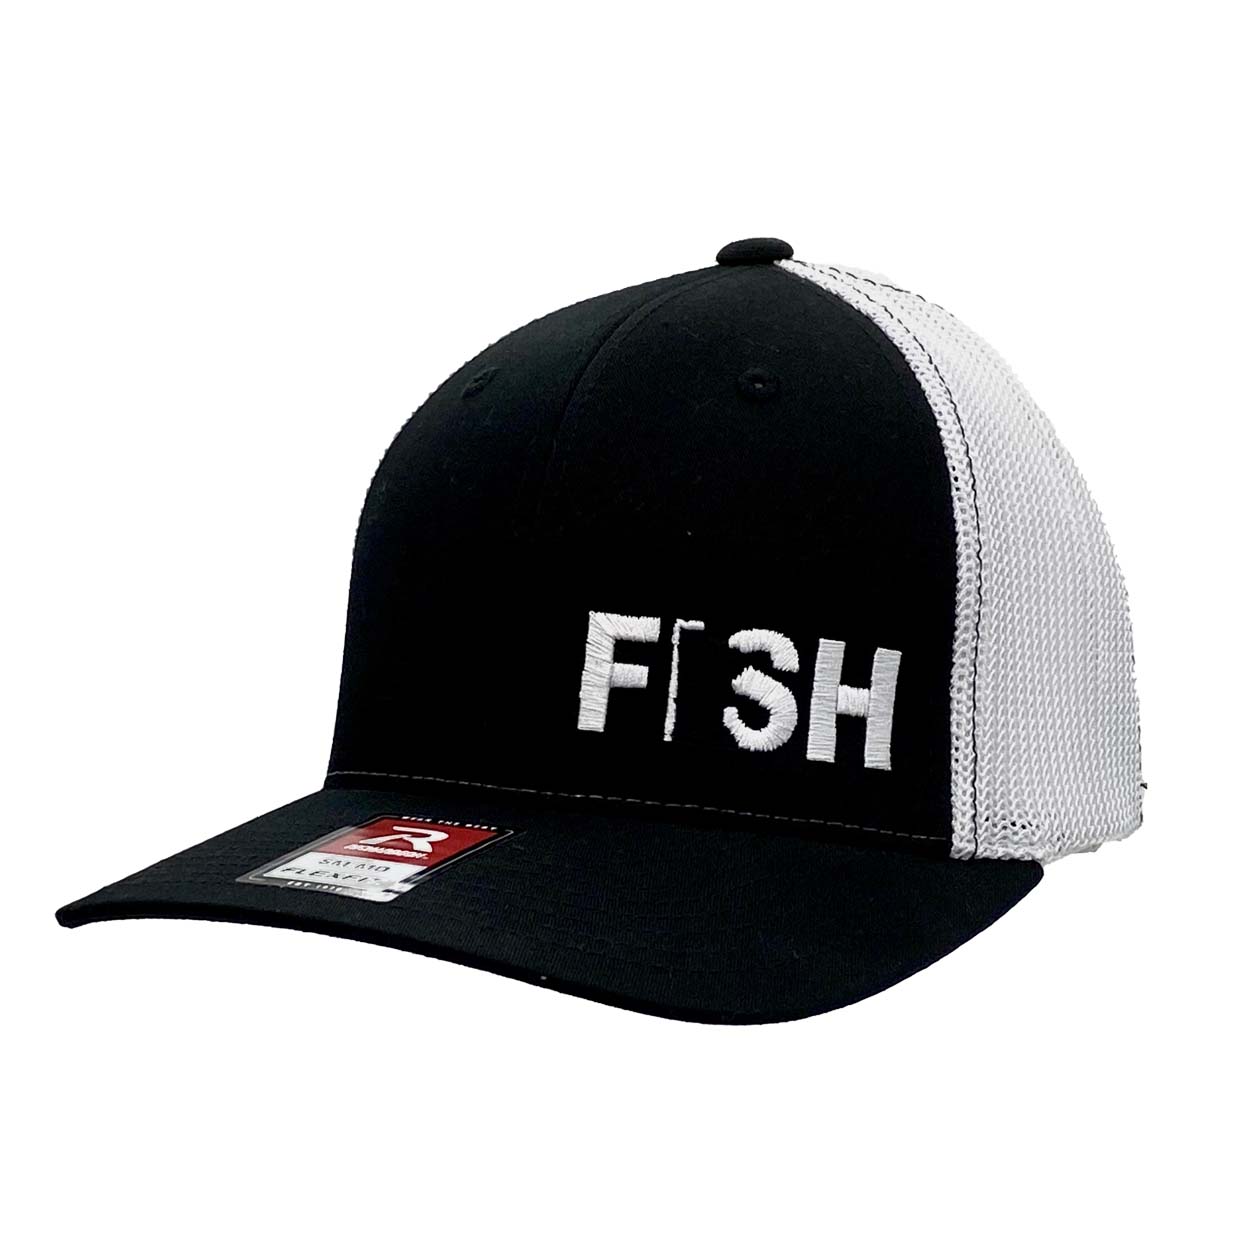 Fish Minnesota Night Out Embroidered Flex Fit Mesh Snapback Trucker Hat Black/White